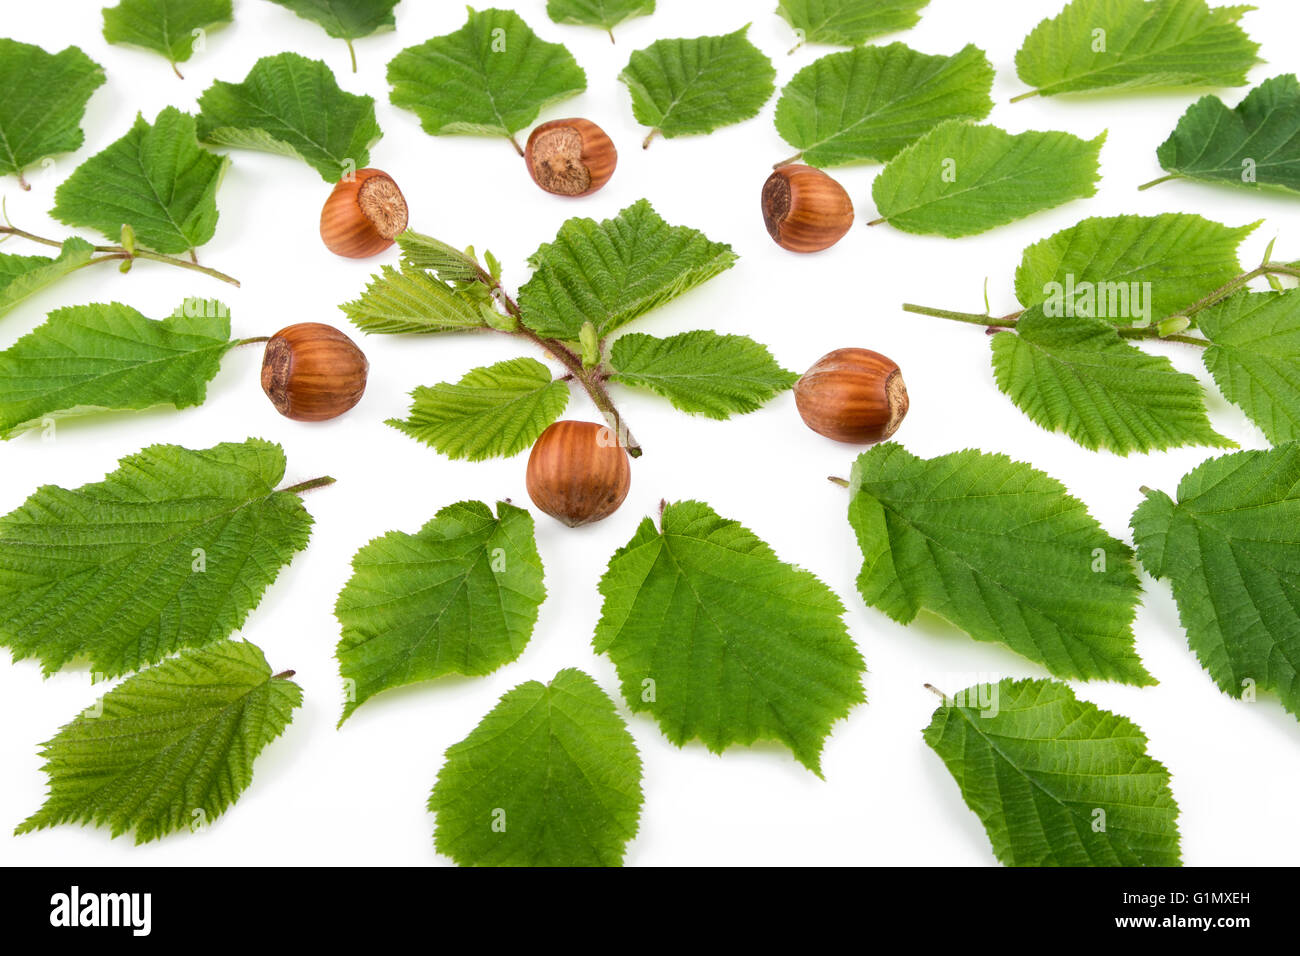 Hazelnuts with green leaves organic background. Stock Photo